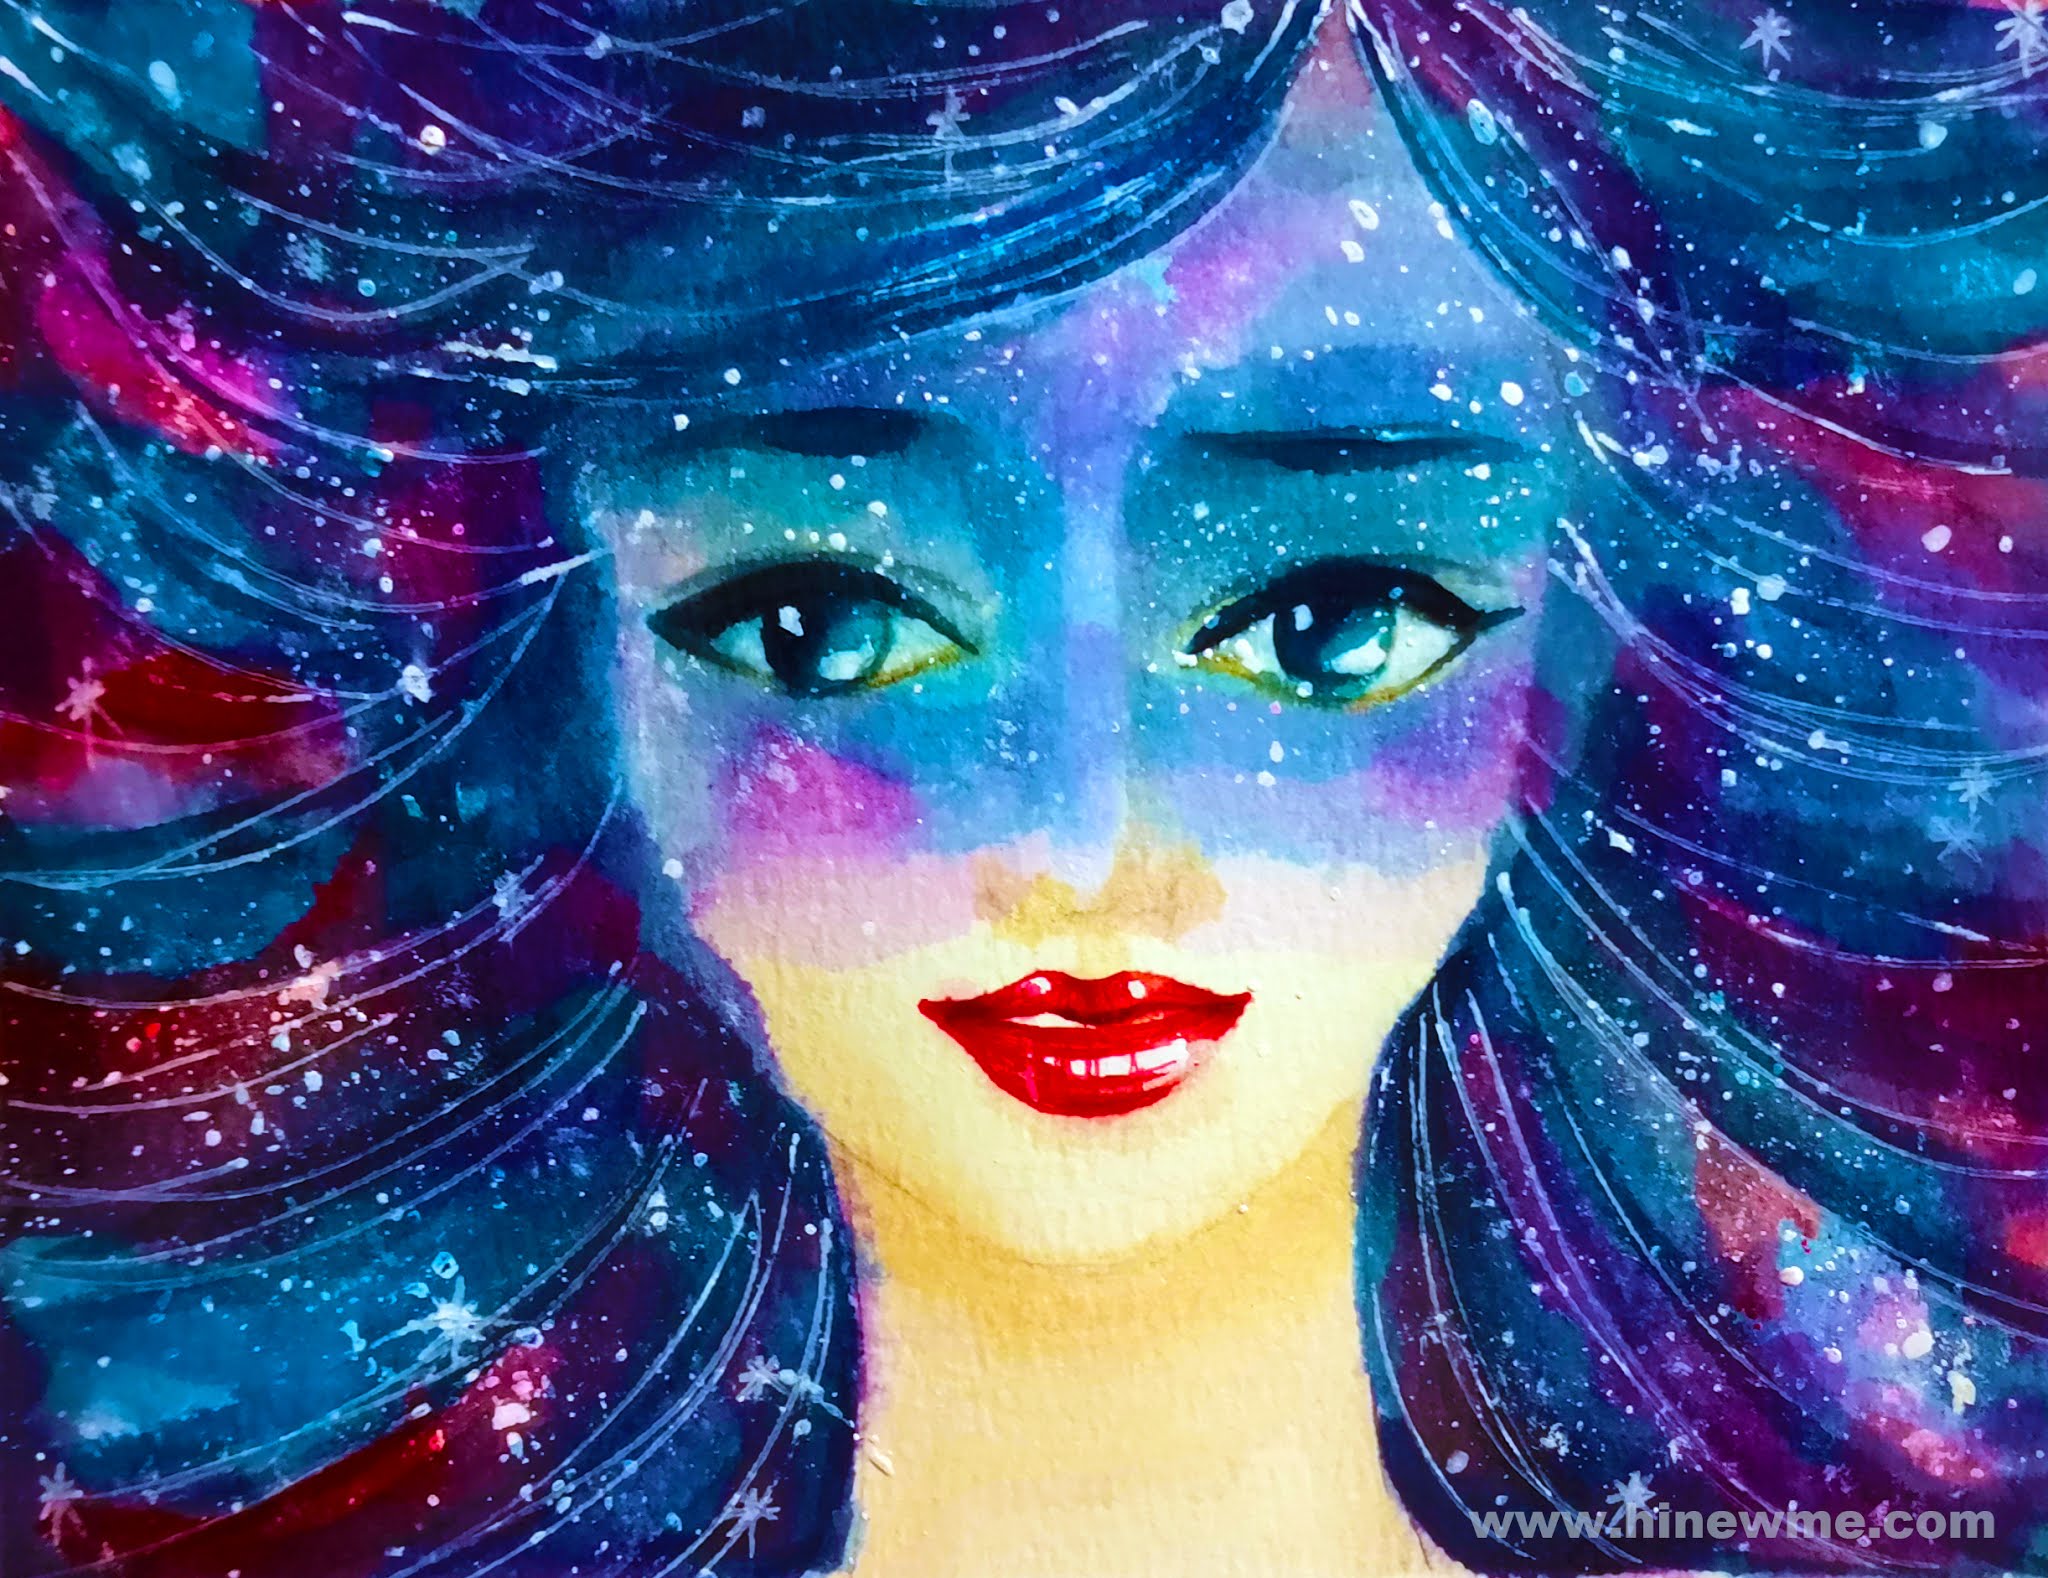 How to draw watercolor galaxy girl step by step tutorial